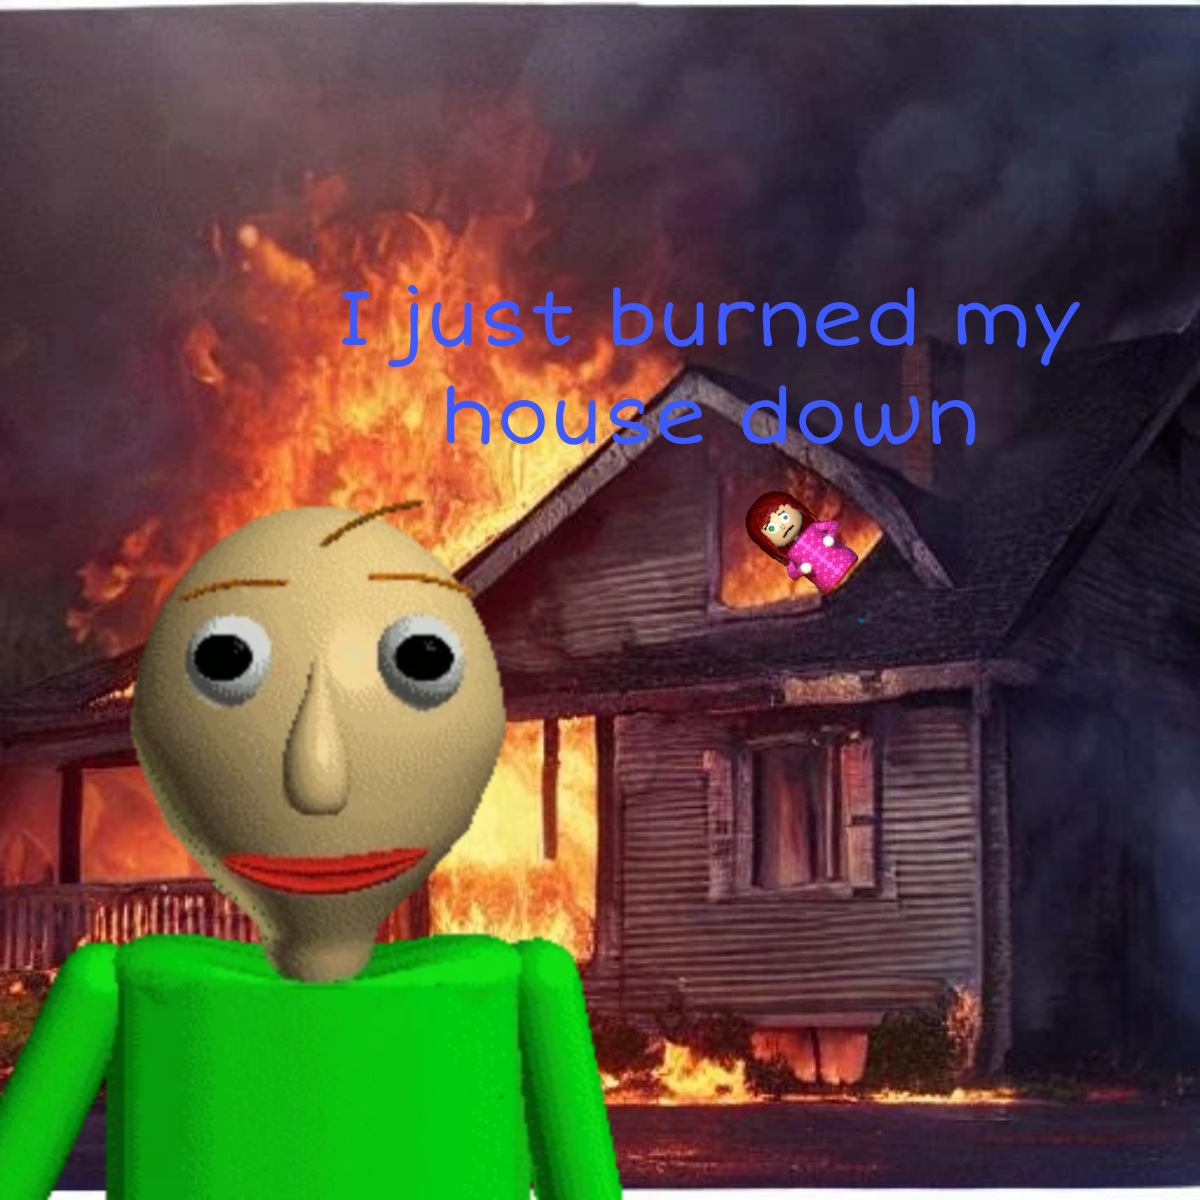 He burned his house down